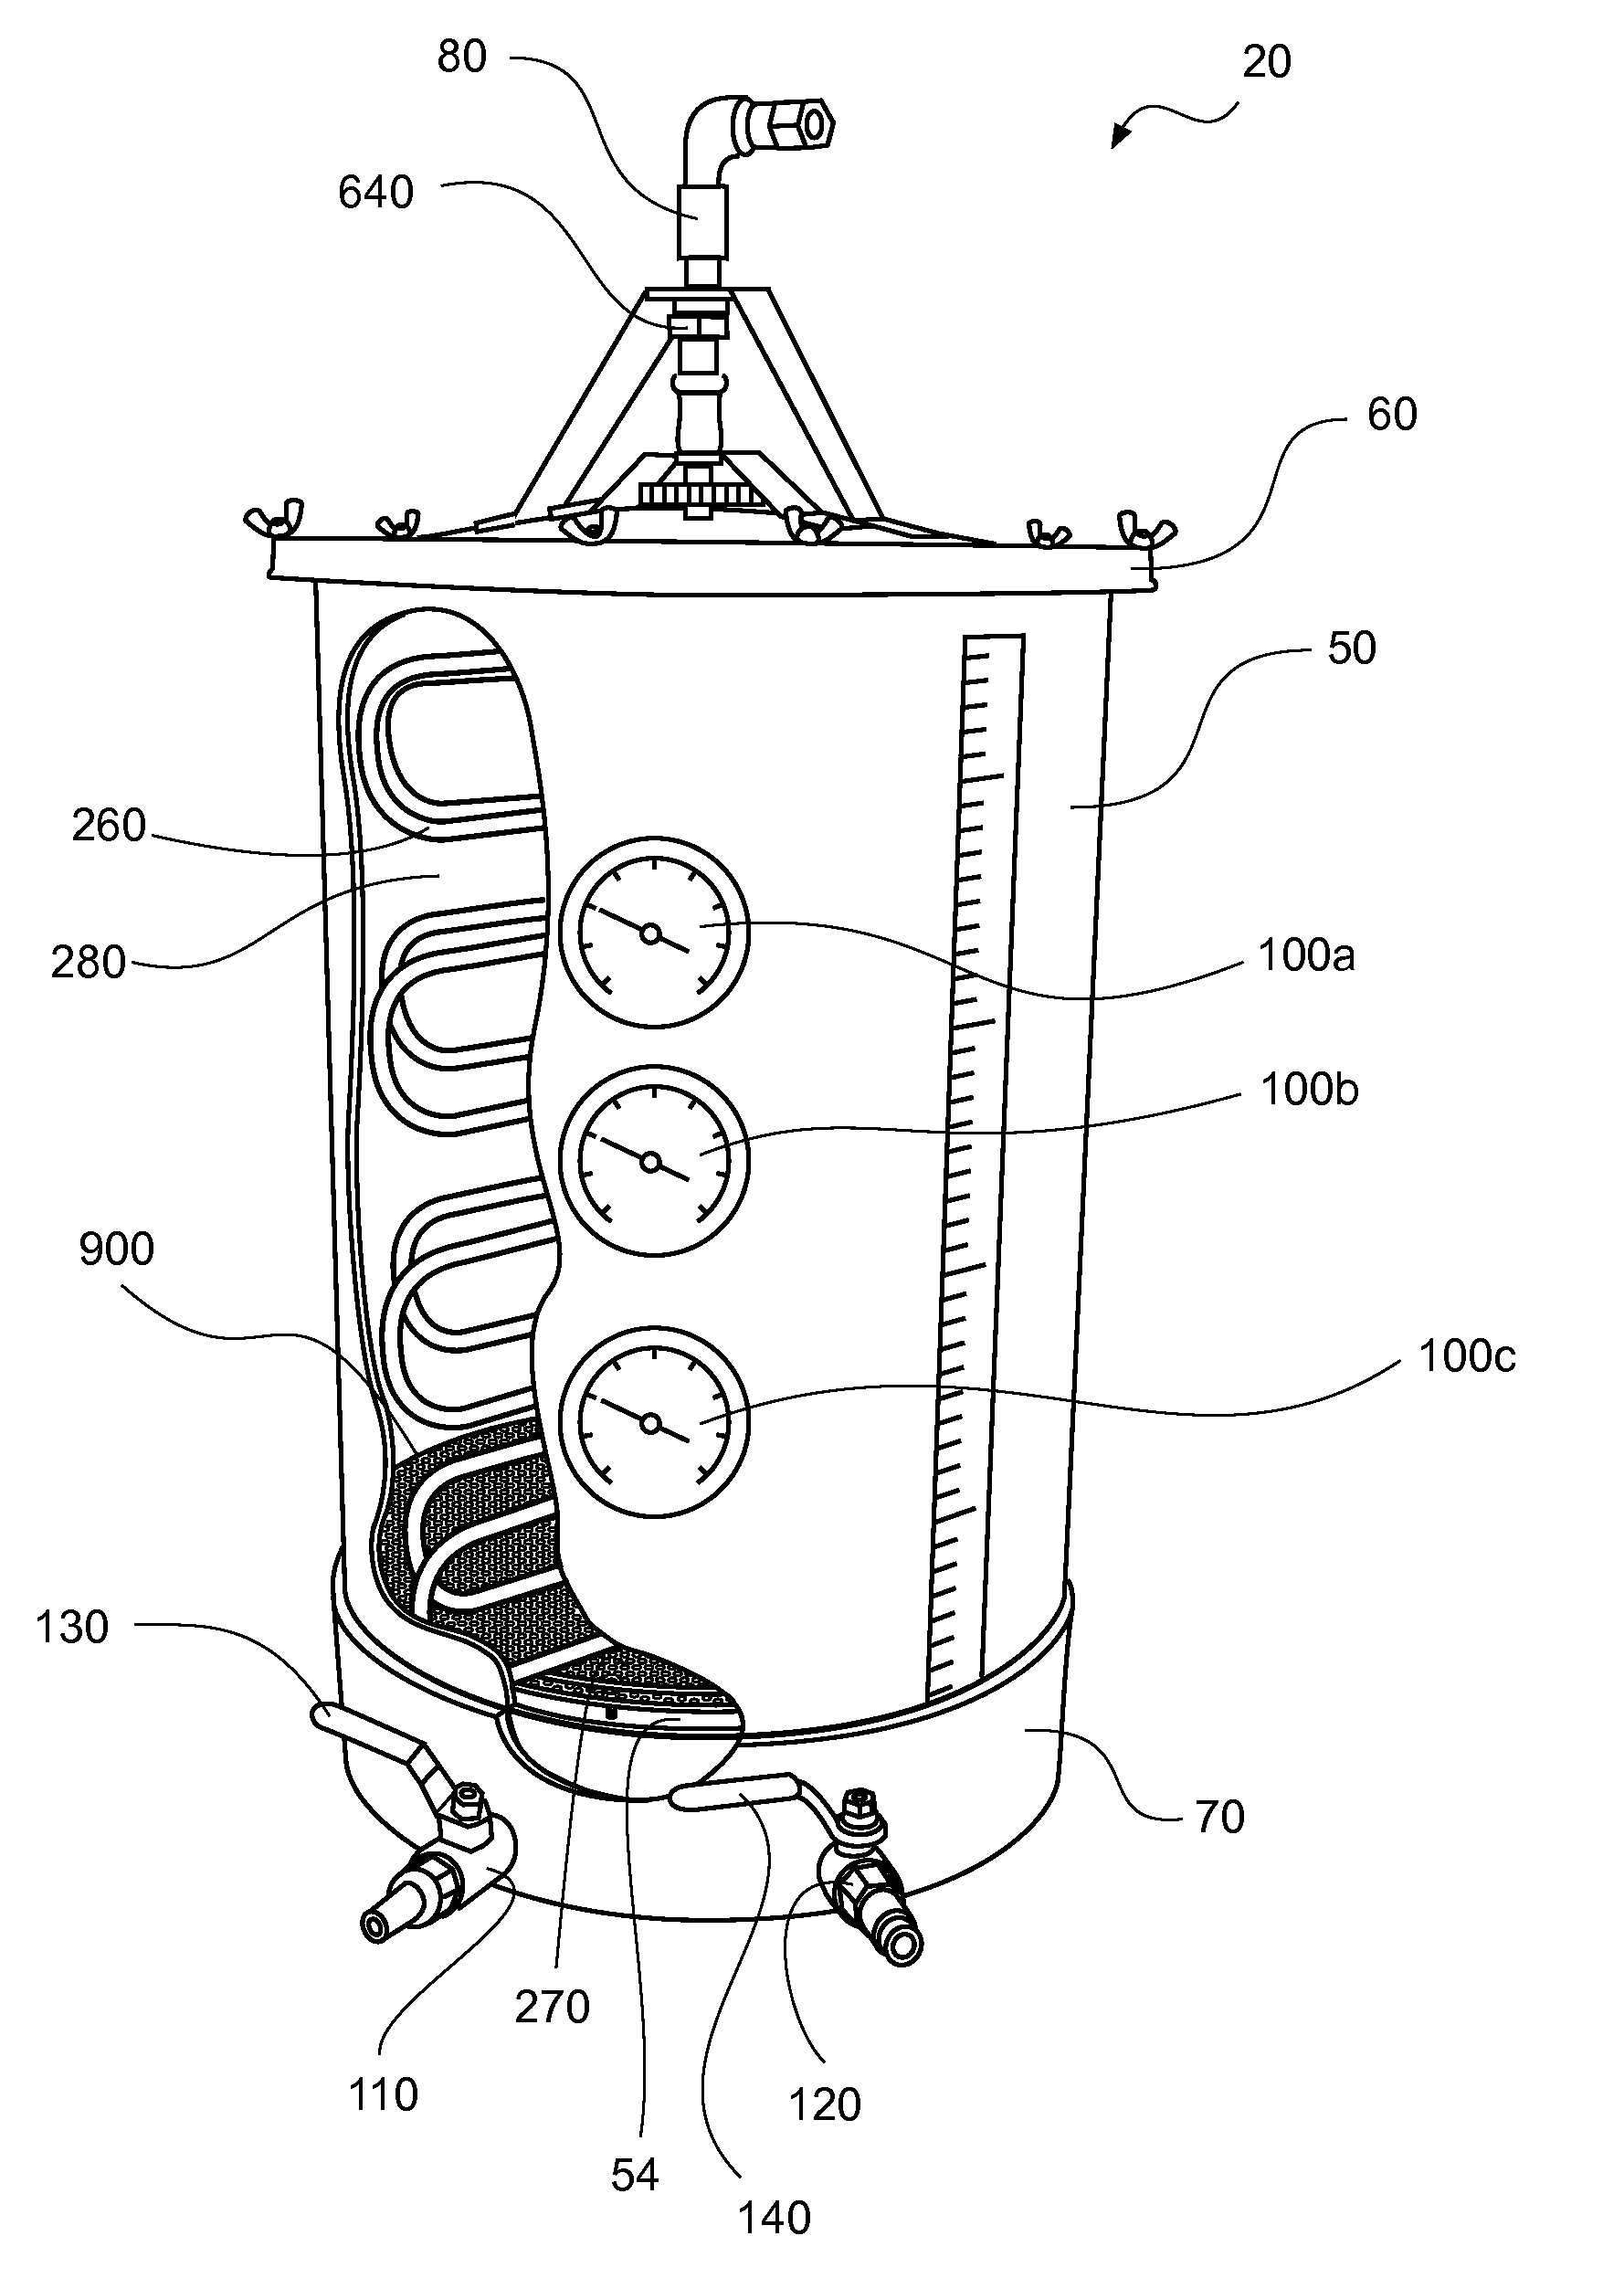 Mash/lauter tun and method of use thereof